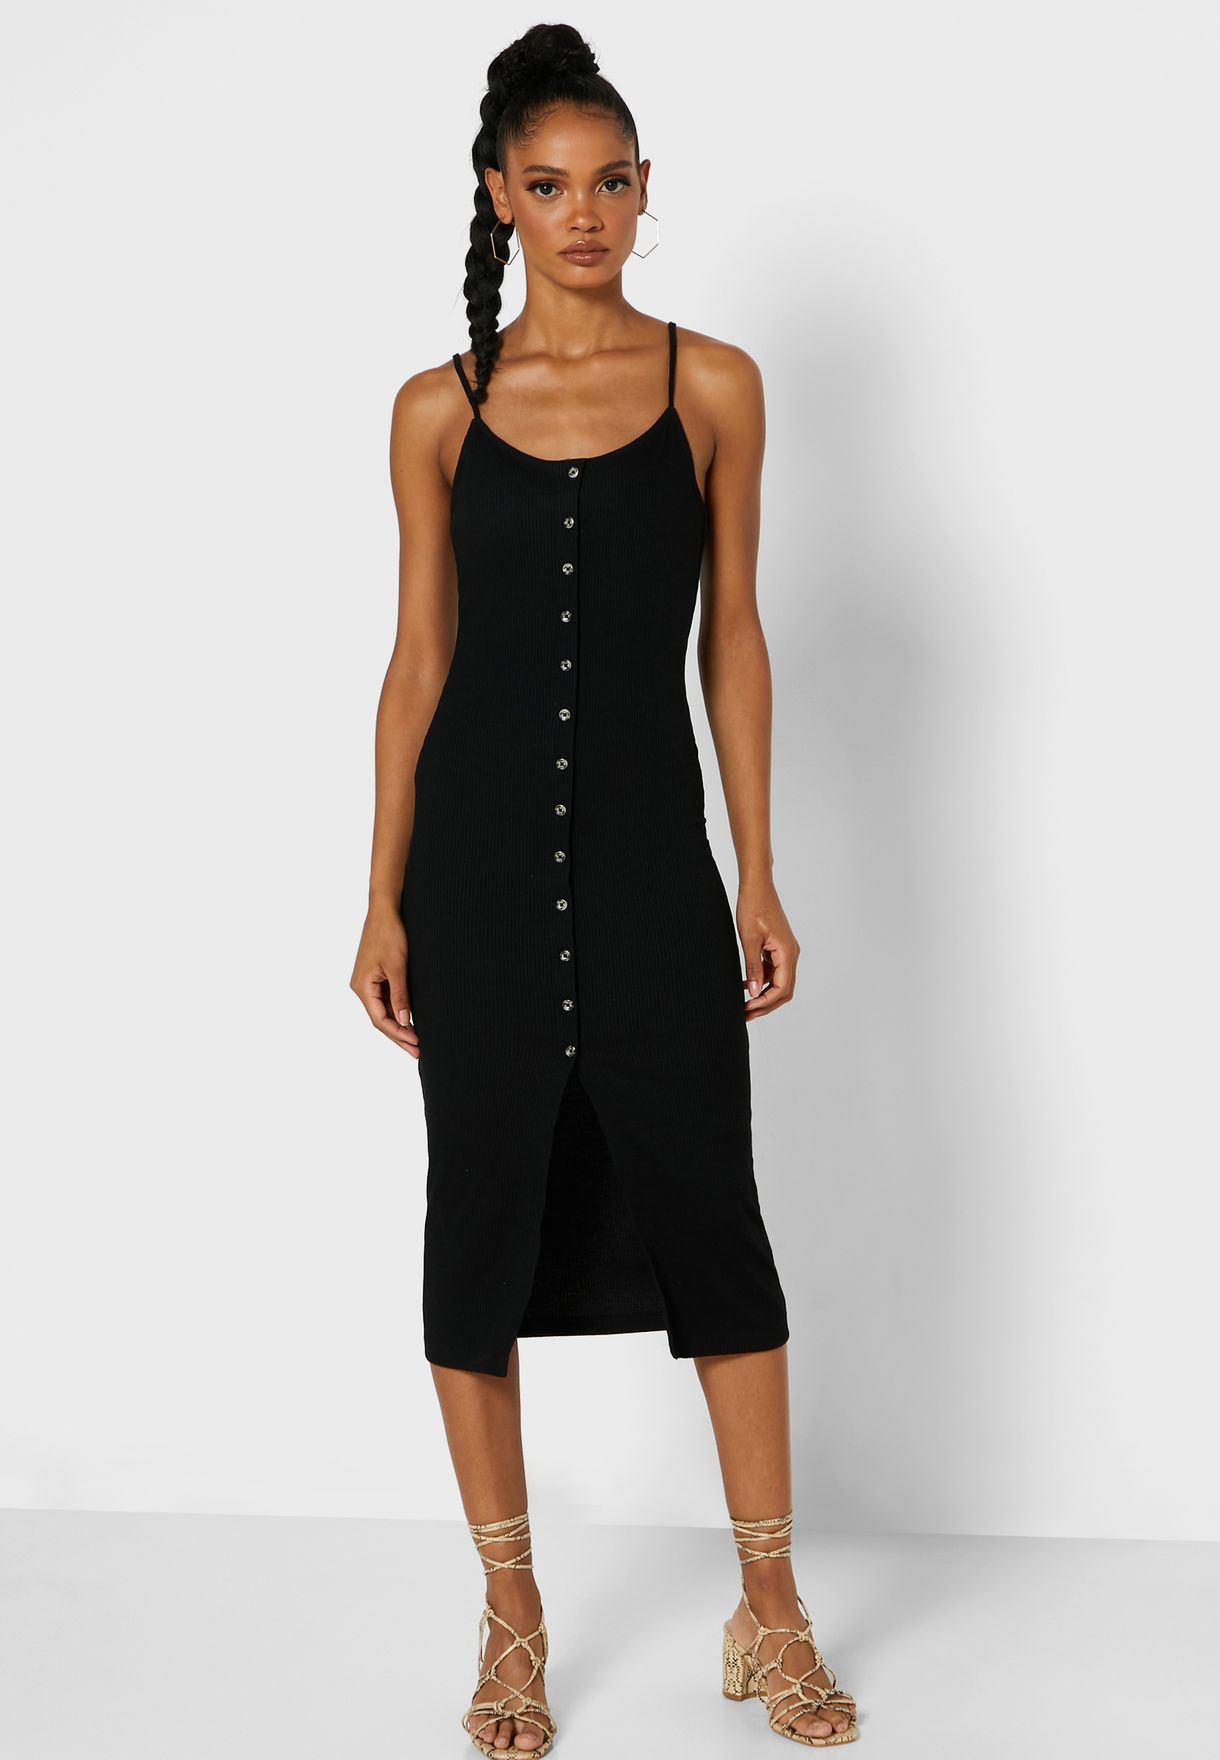 forever 21 black button up dress